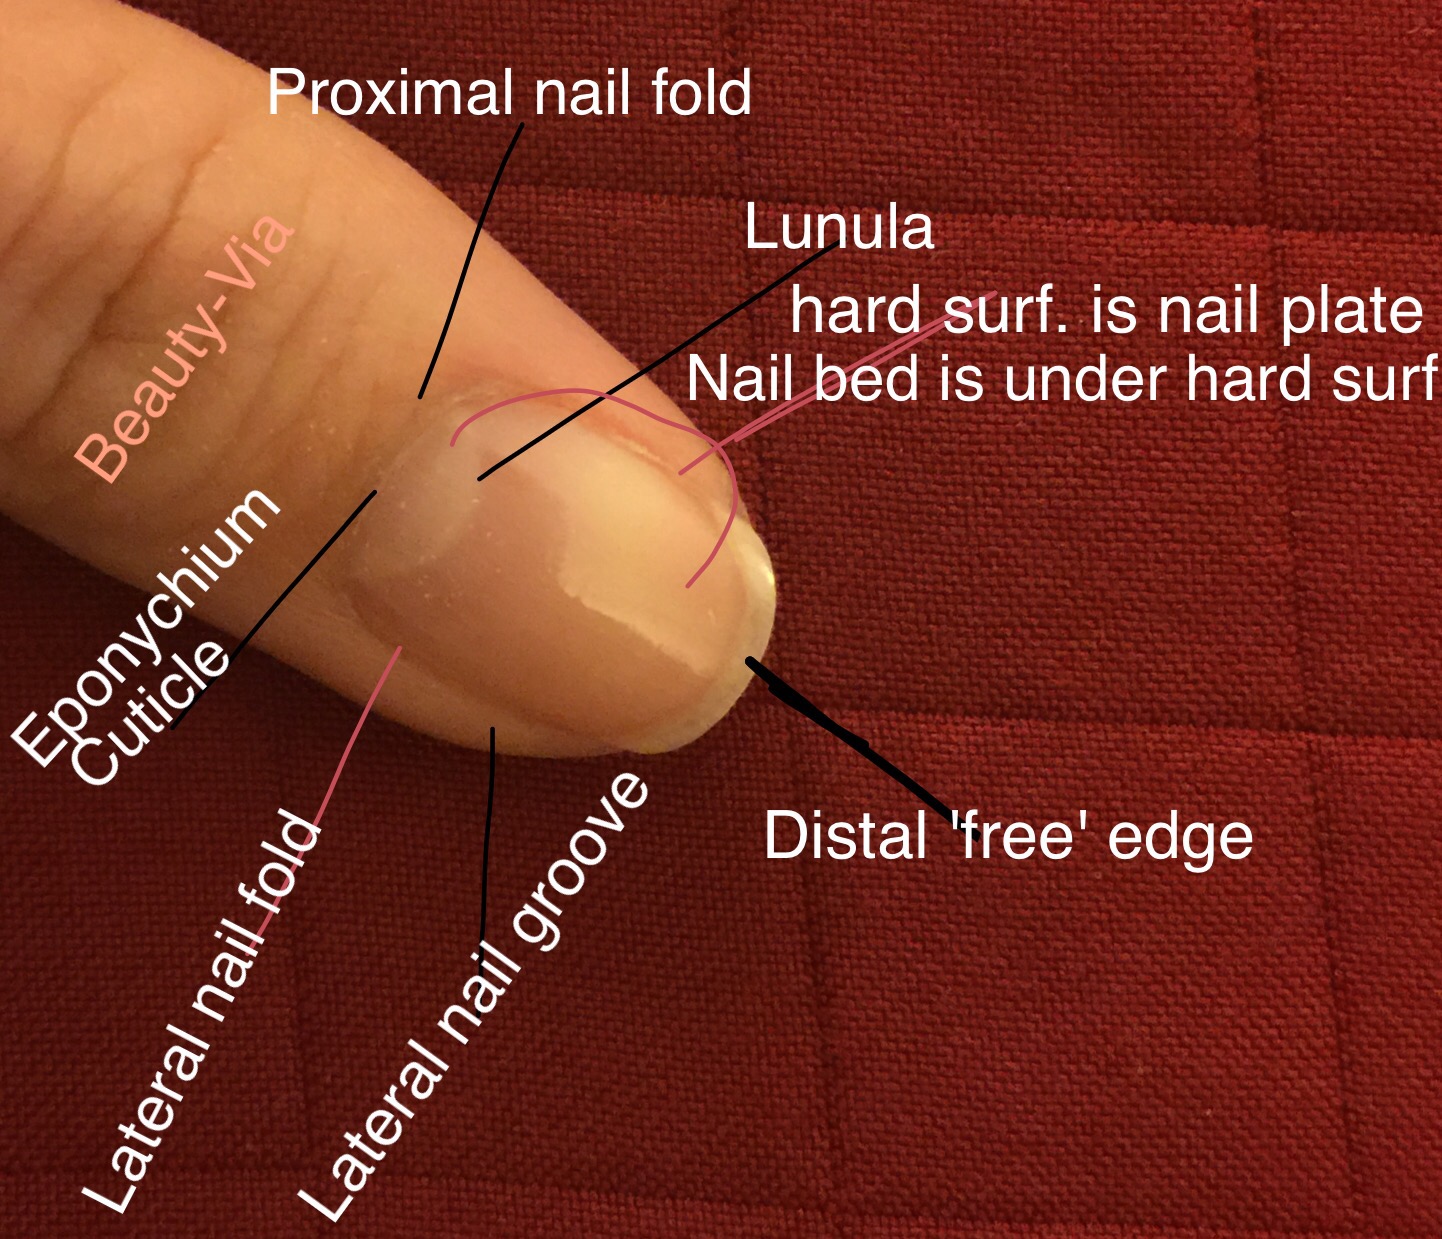 What is the free edge of the nail?